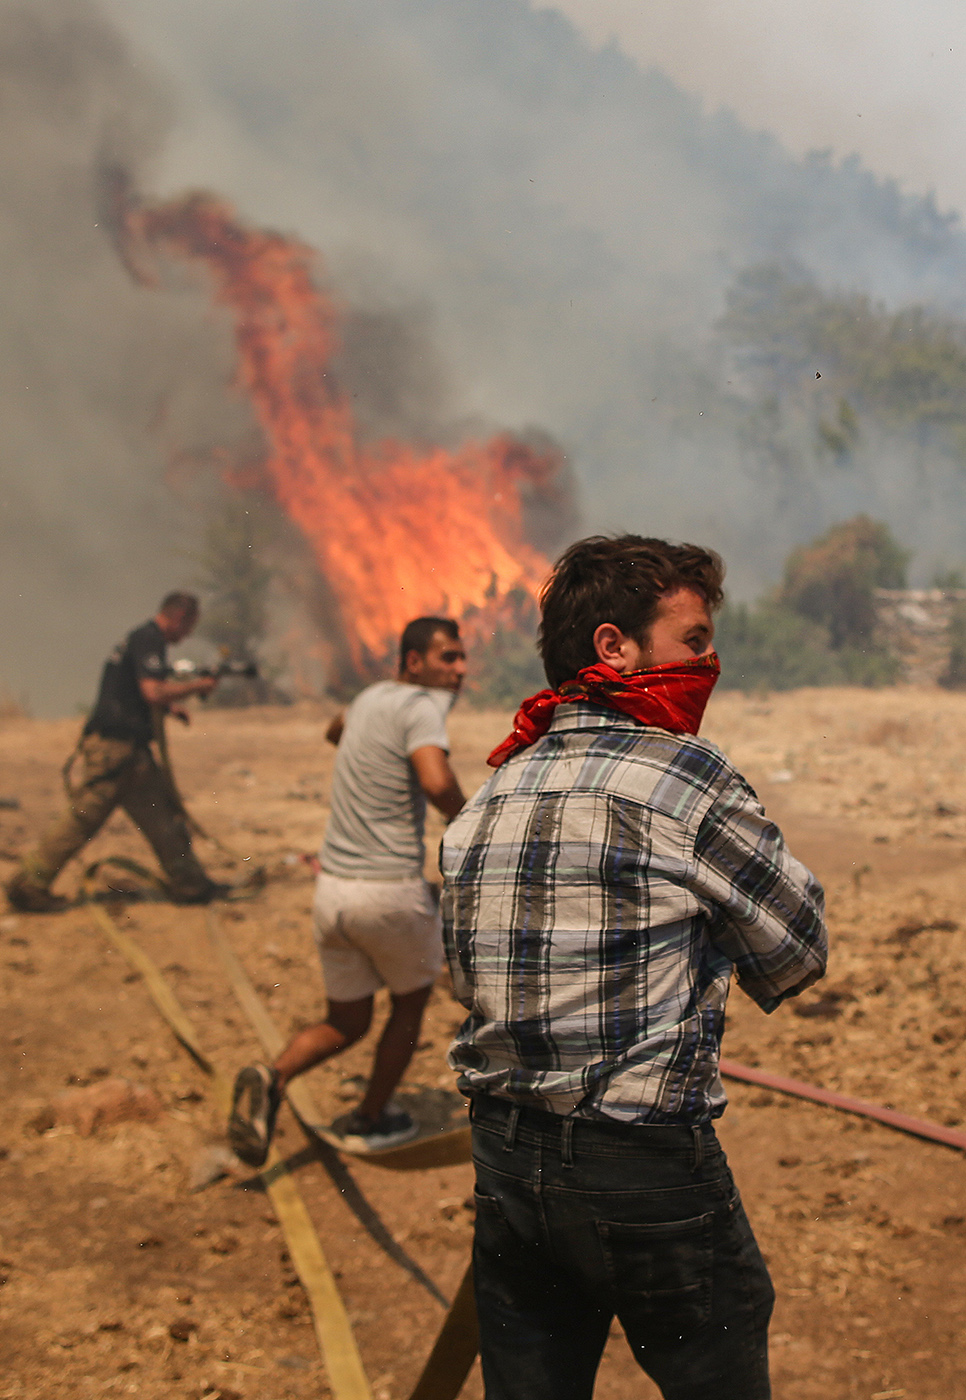 People fight with the wildfire burning at the Cokertme village of Milas district of Mugla, Turkey, 02 August 2021. Turkish Health minister Fahrettin Koca confirmed that eight people have lost their lives due to the wildfires raging in Turkey’s Mediterranean towns.